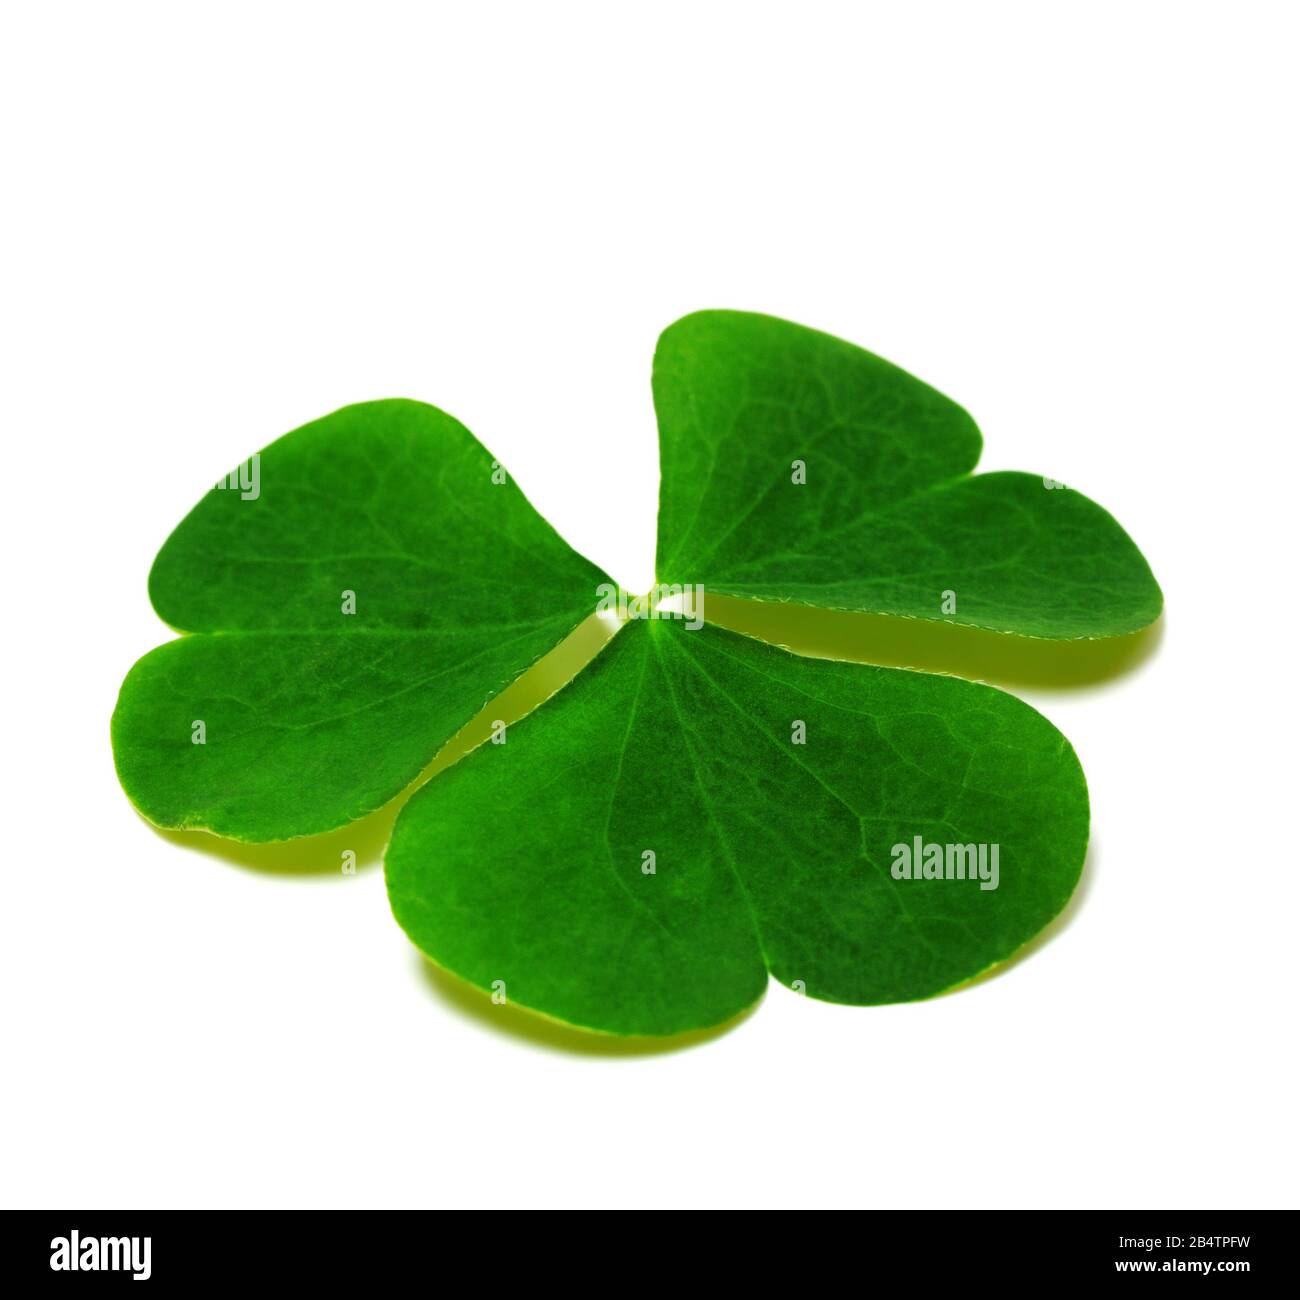 Spring clover leaf isolated on white background with shadow. Green three-leaved shamrock - symbol of Saint Patricks Day. Close-up view. Stock Photo